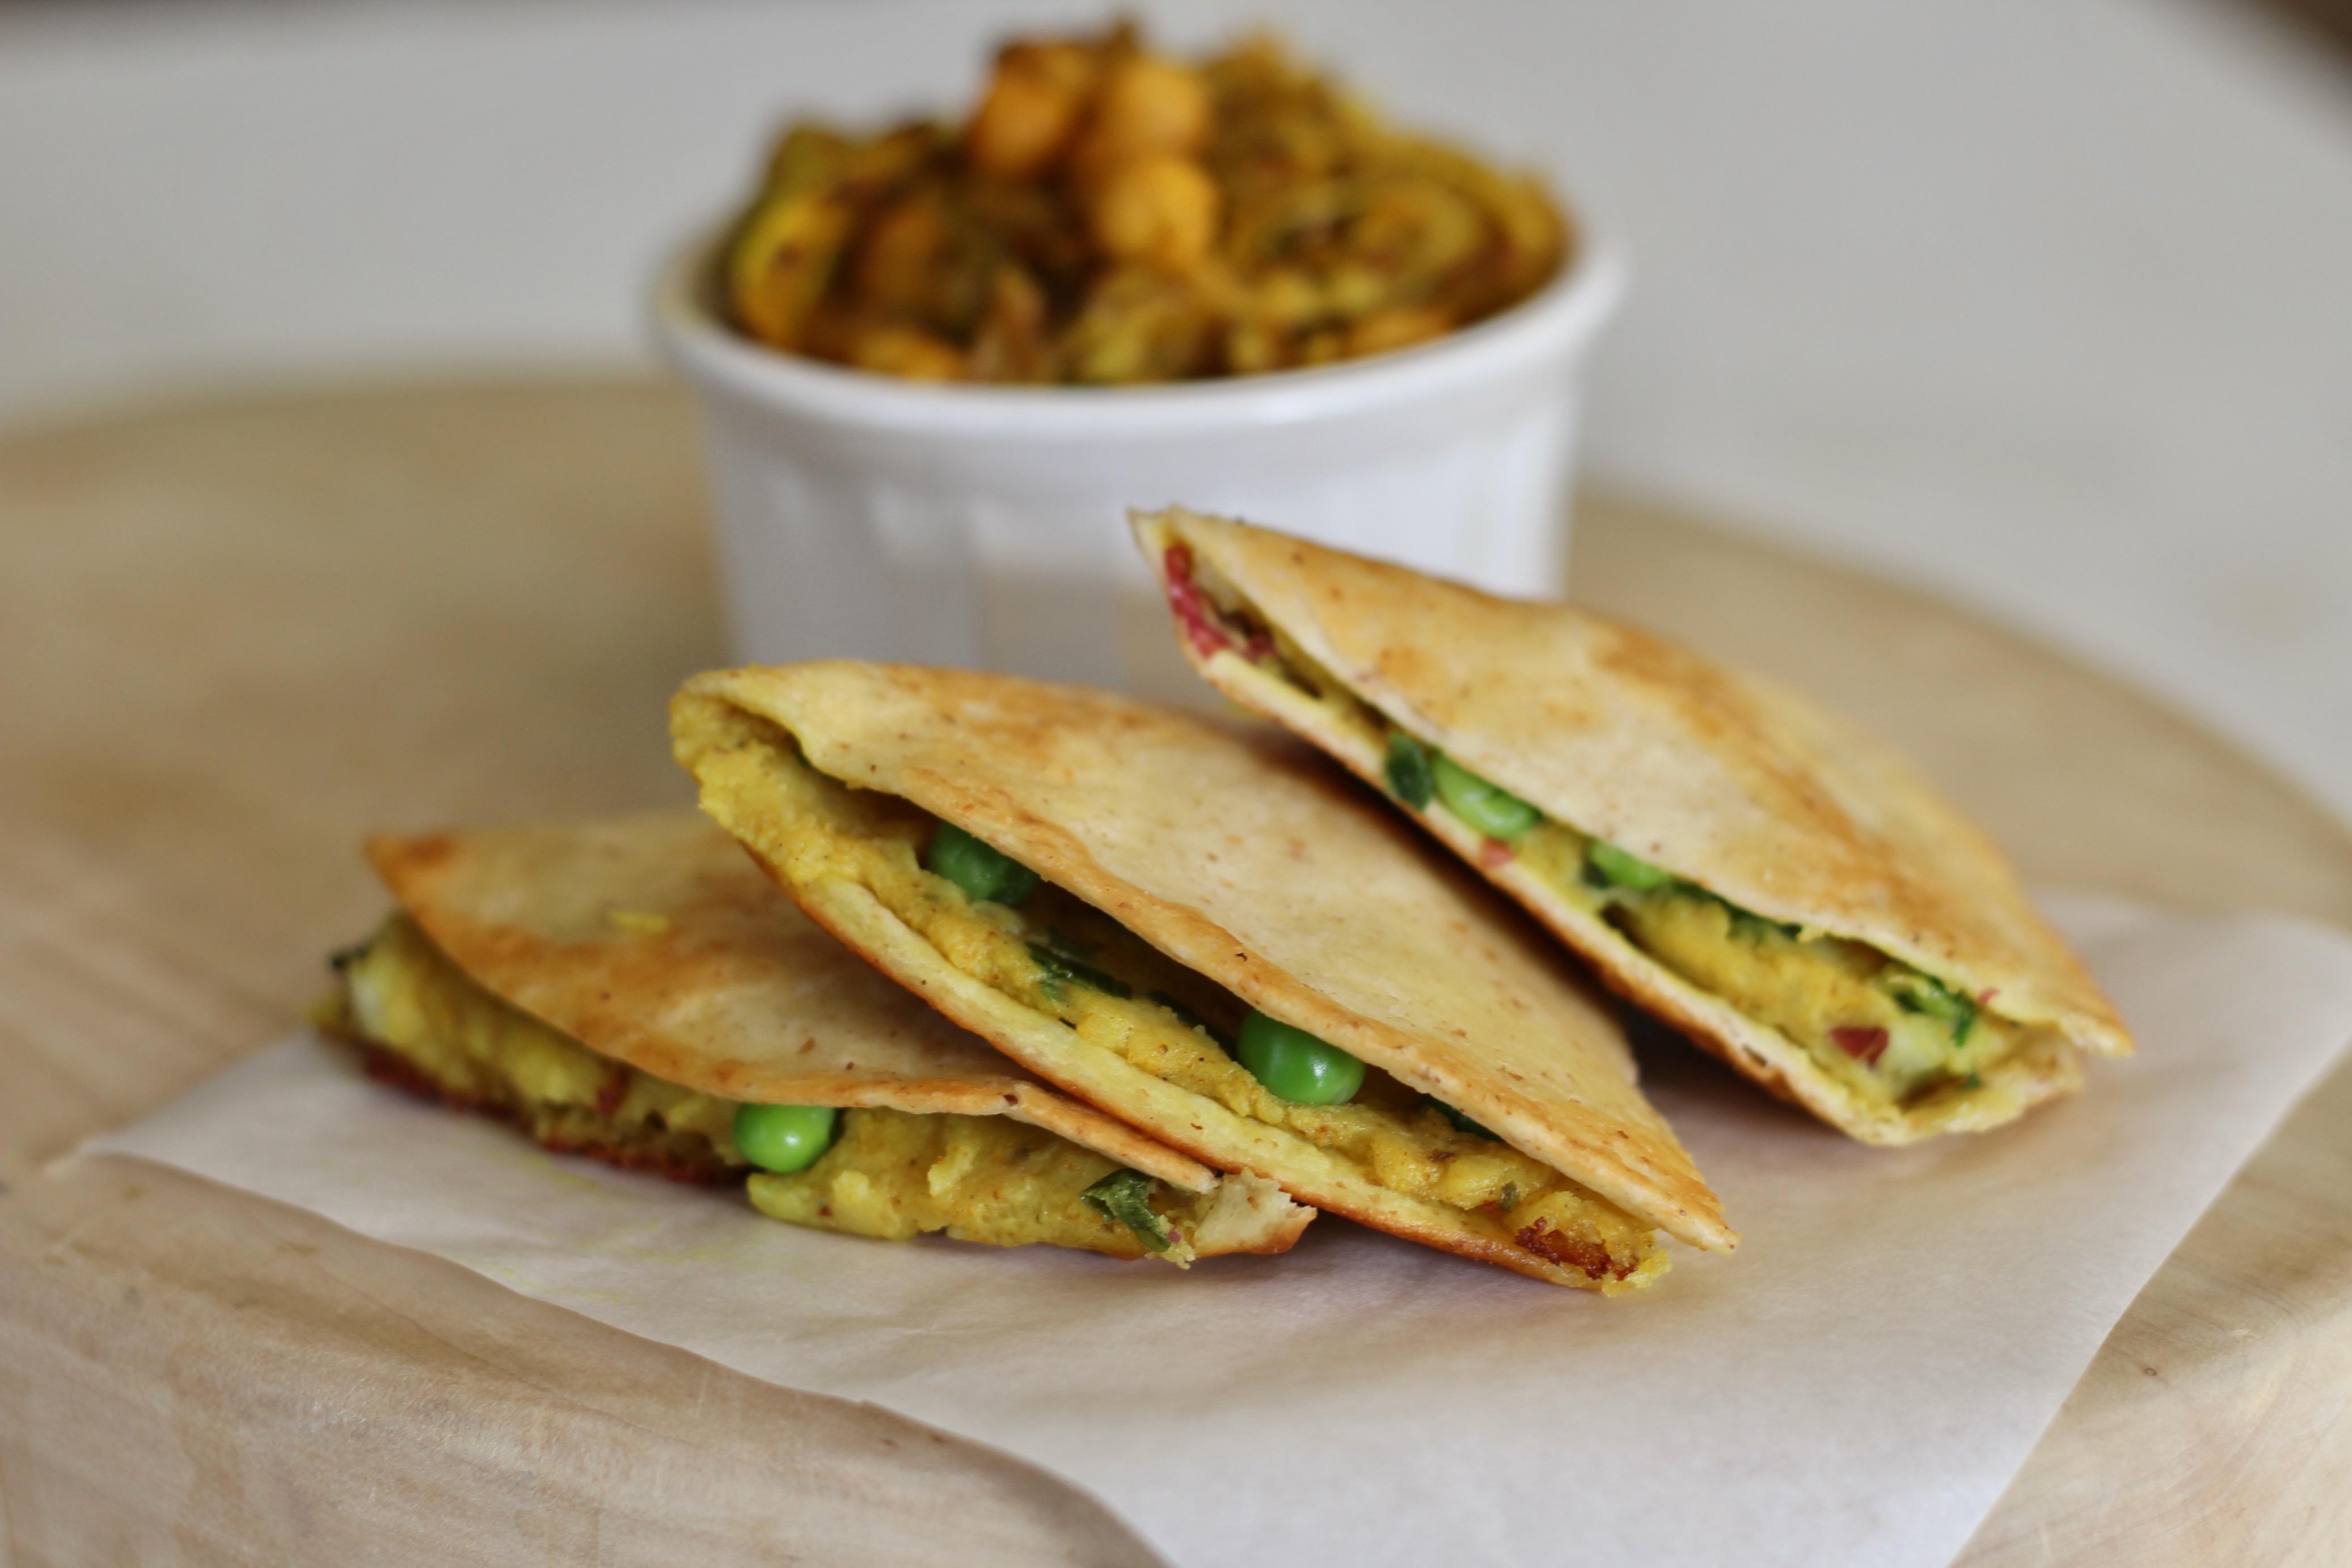 Mal's Samosa Quesadillas with Curried Cabbage and Chickpeas 